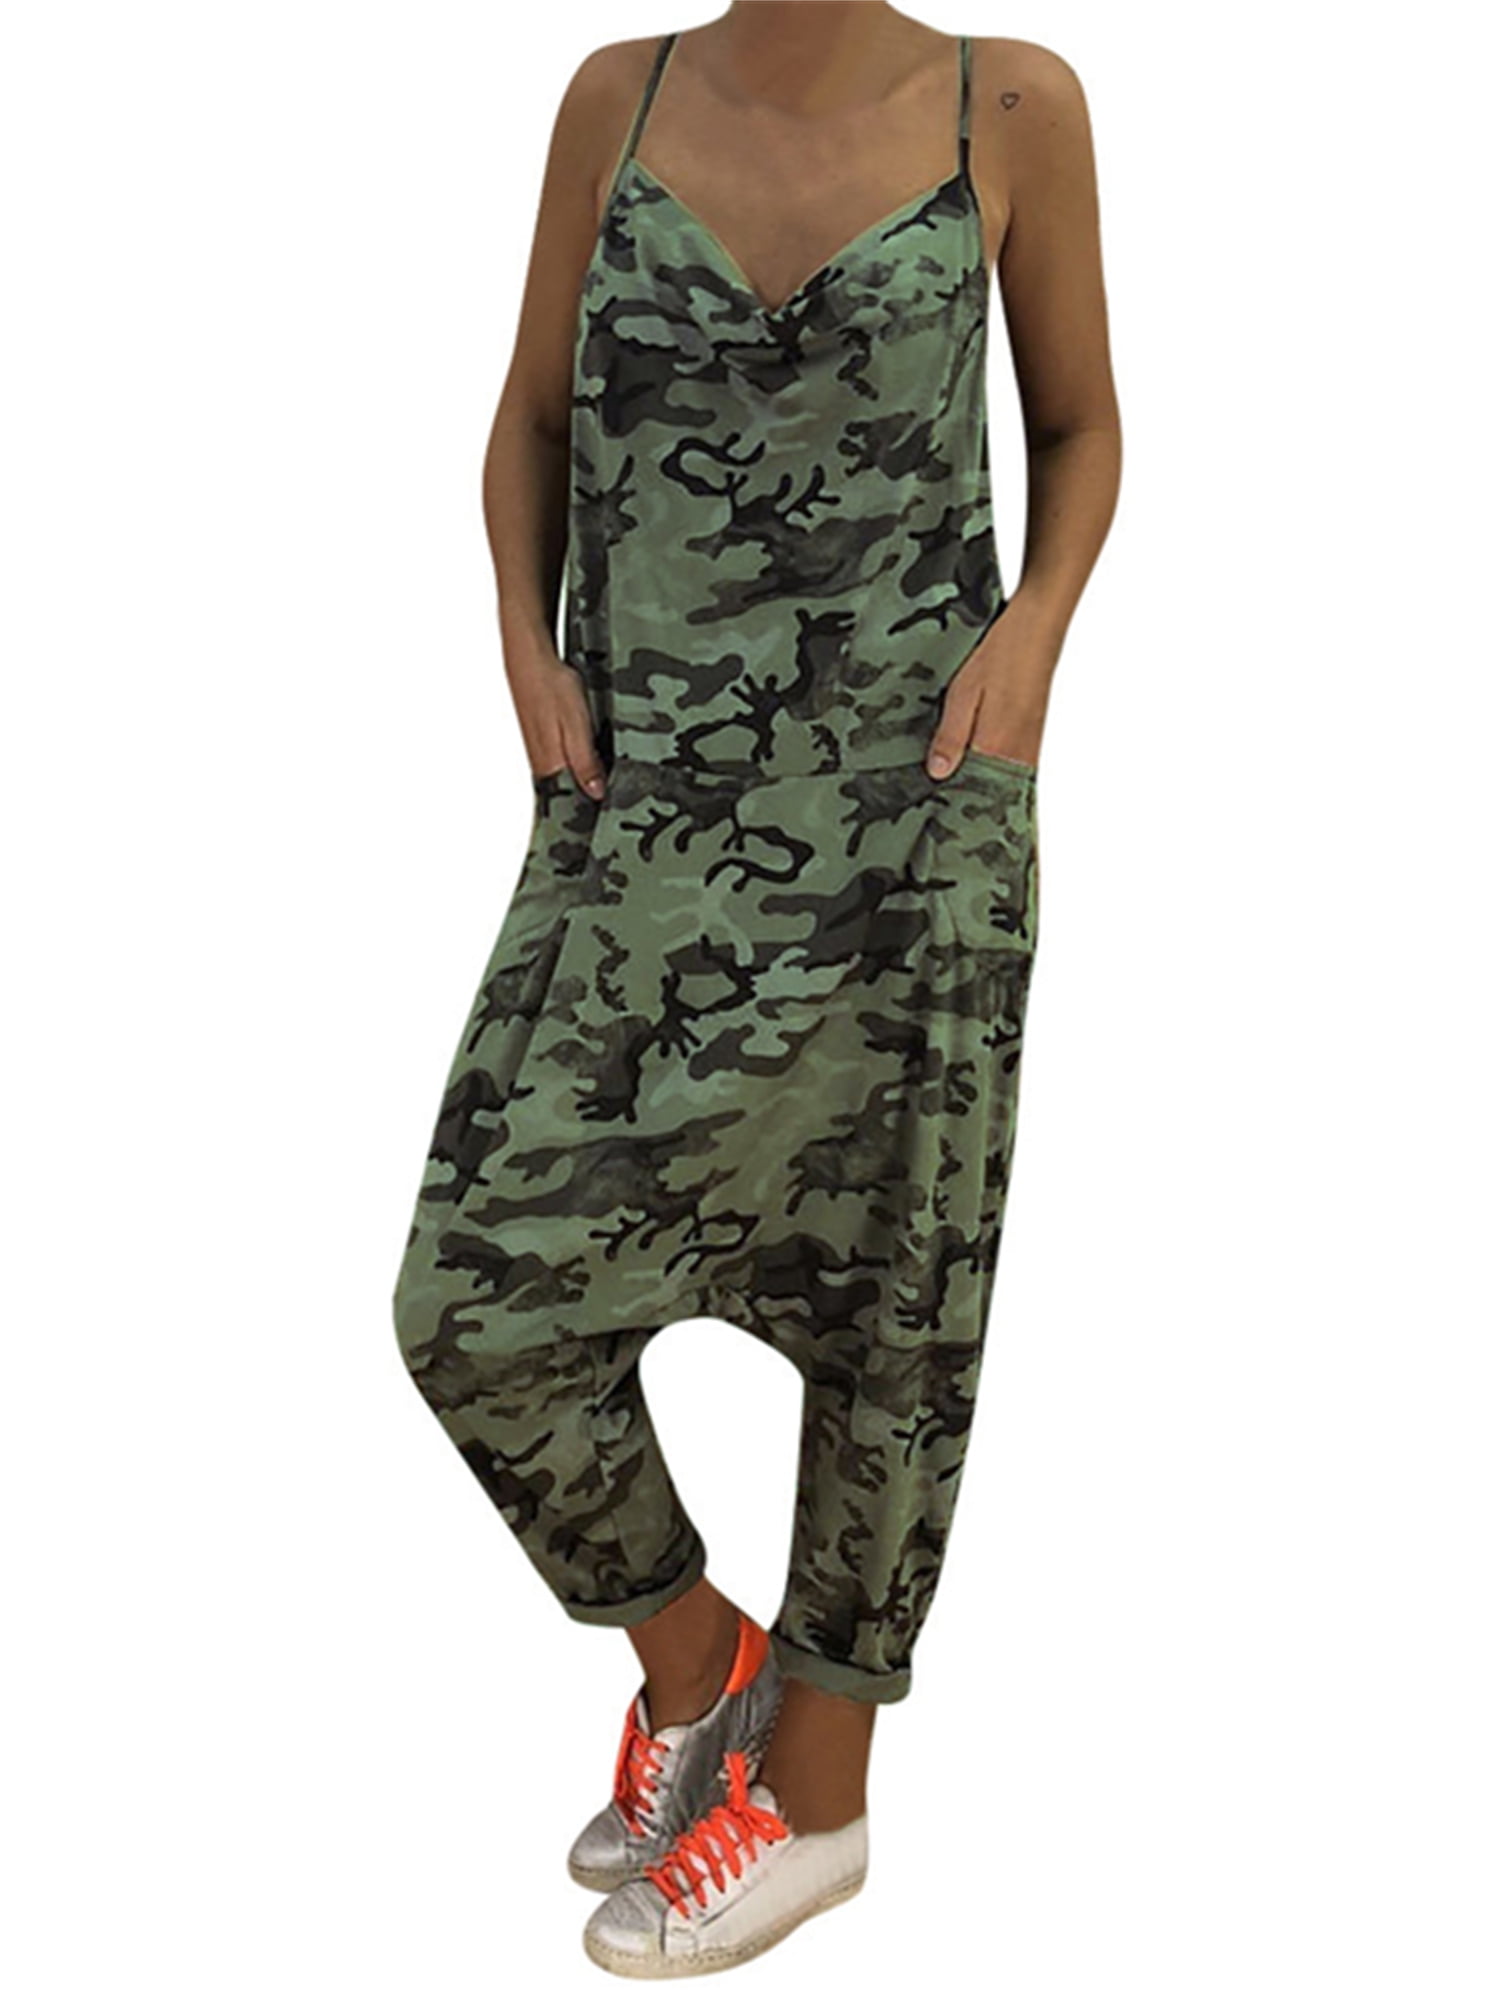 G-Style USA Women's Camo Print Jumpsuit Romper Overall Pants   RJHO147A-D14C 